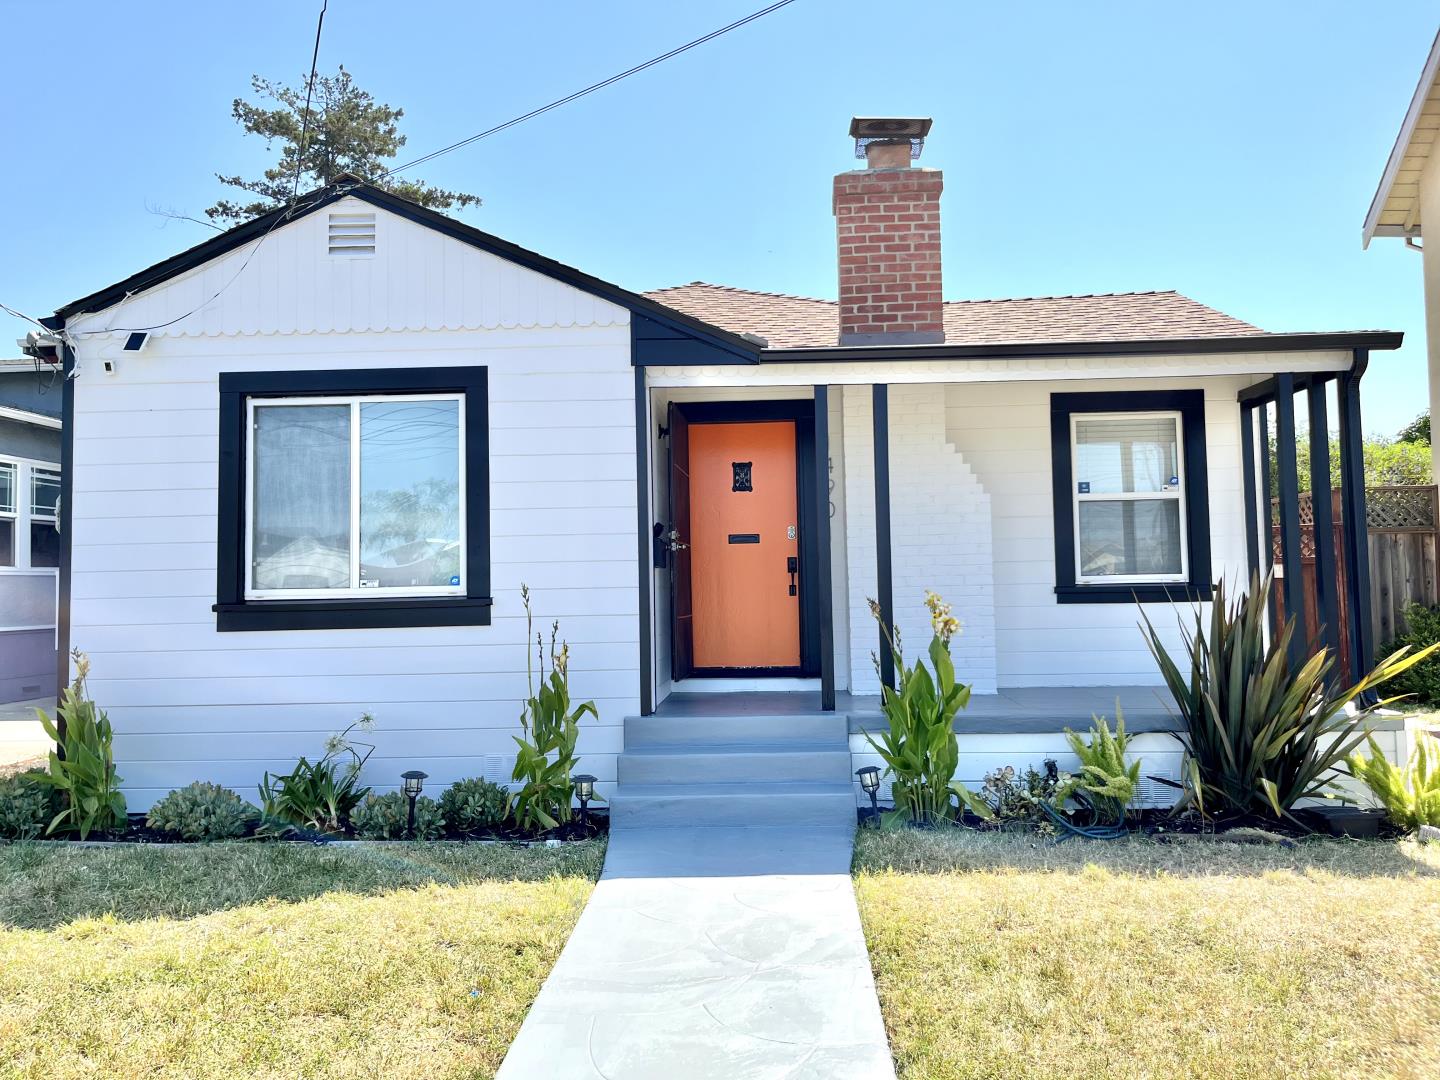 Photo of 1490 Plaza Dr in San Leandro, CA